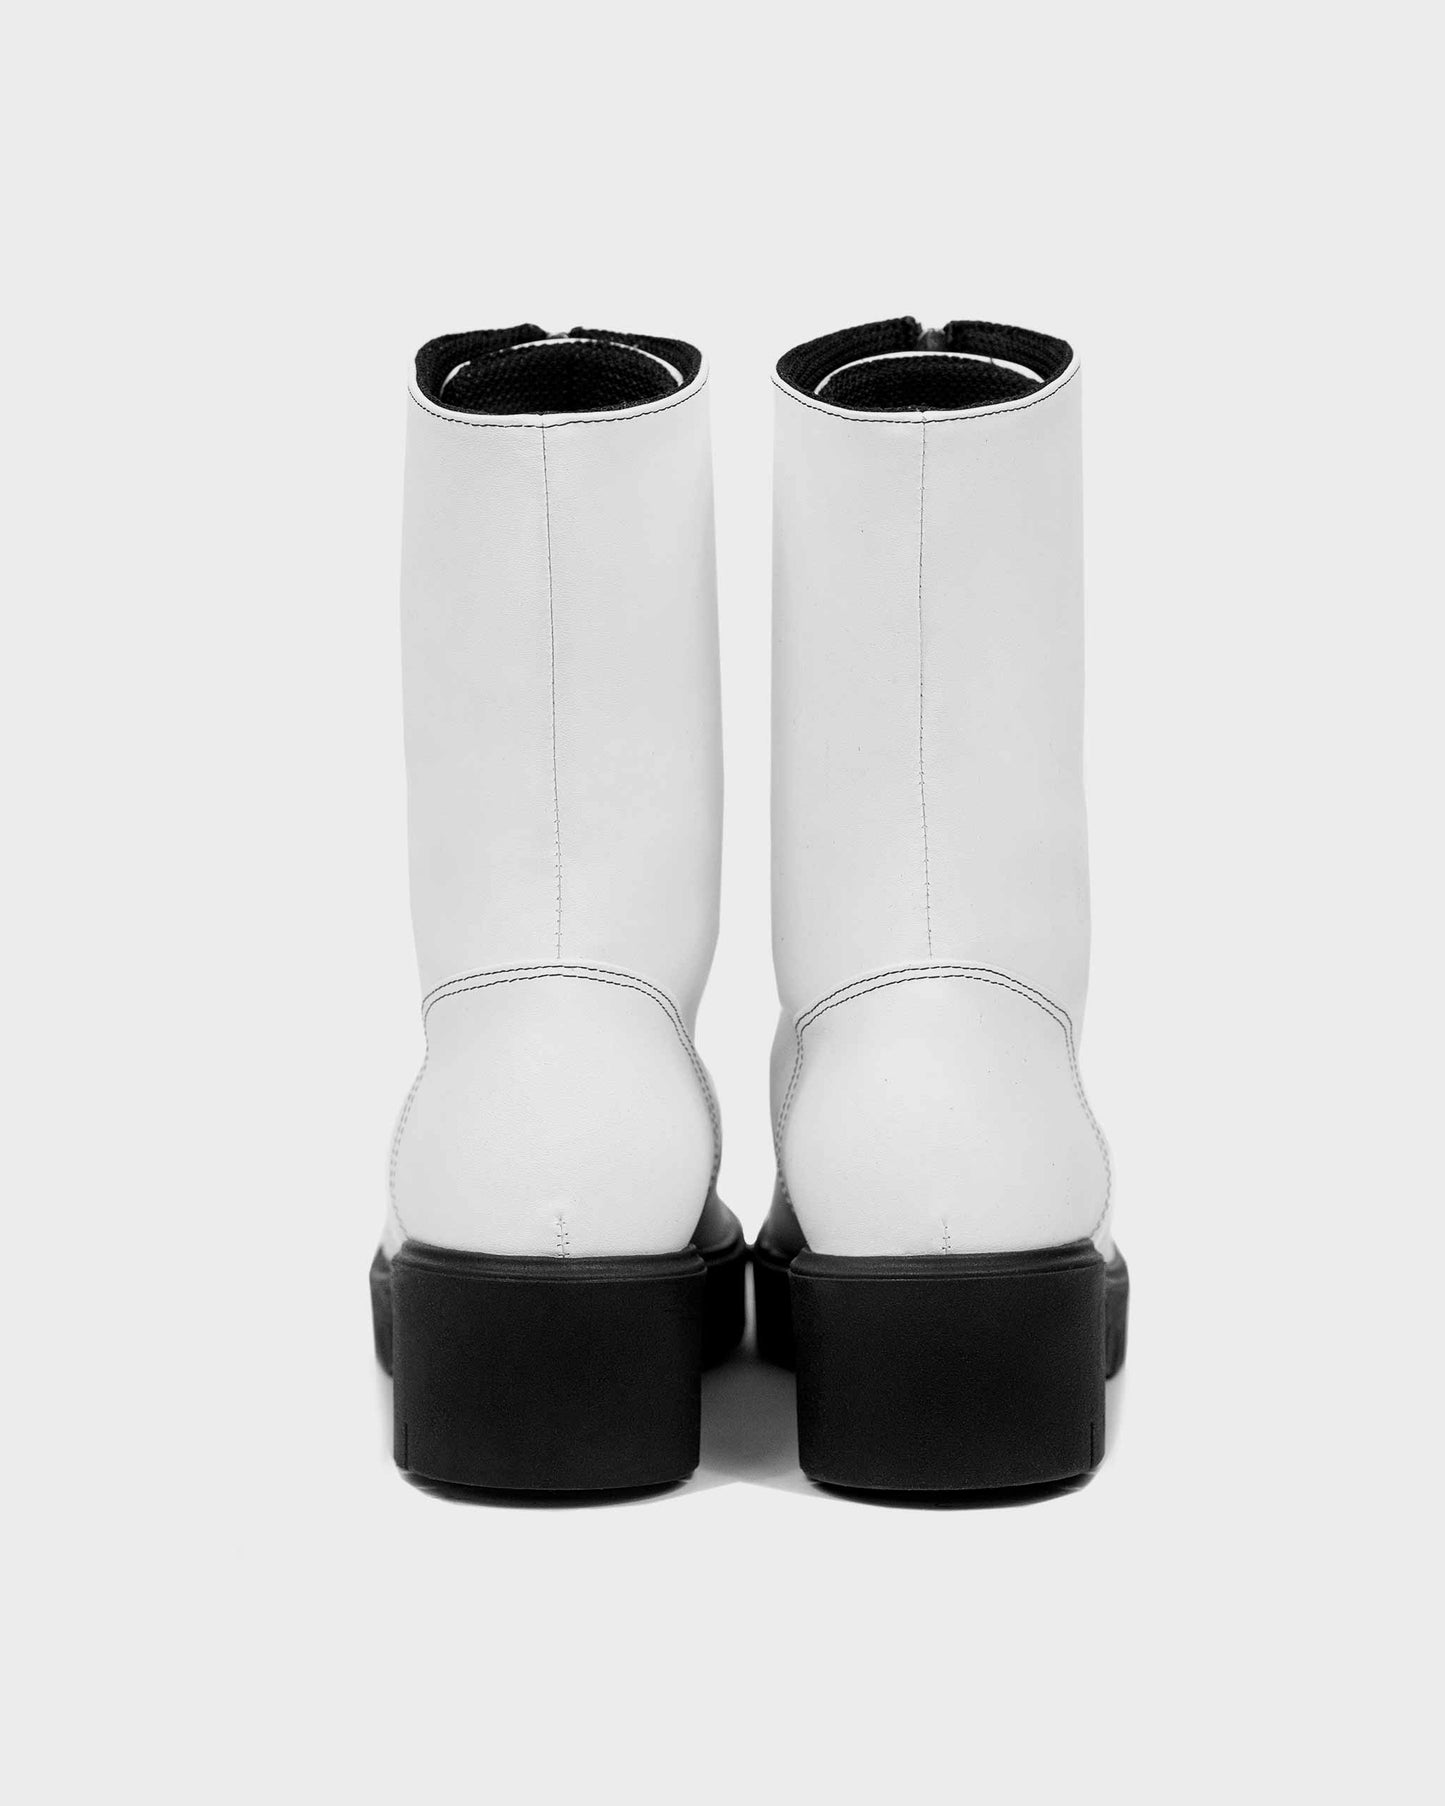 Cyber Boots White cactus leather ankle boots - sample sale